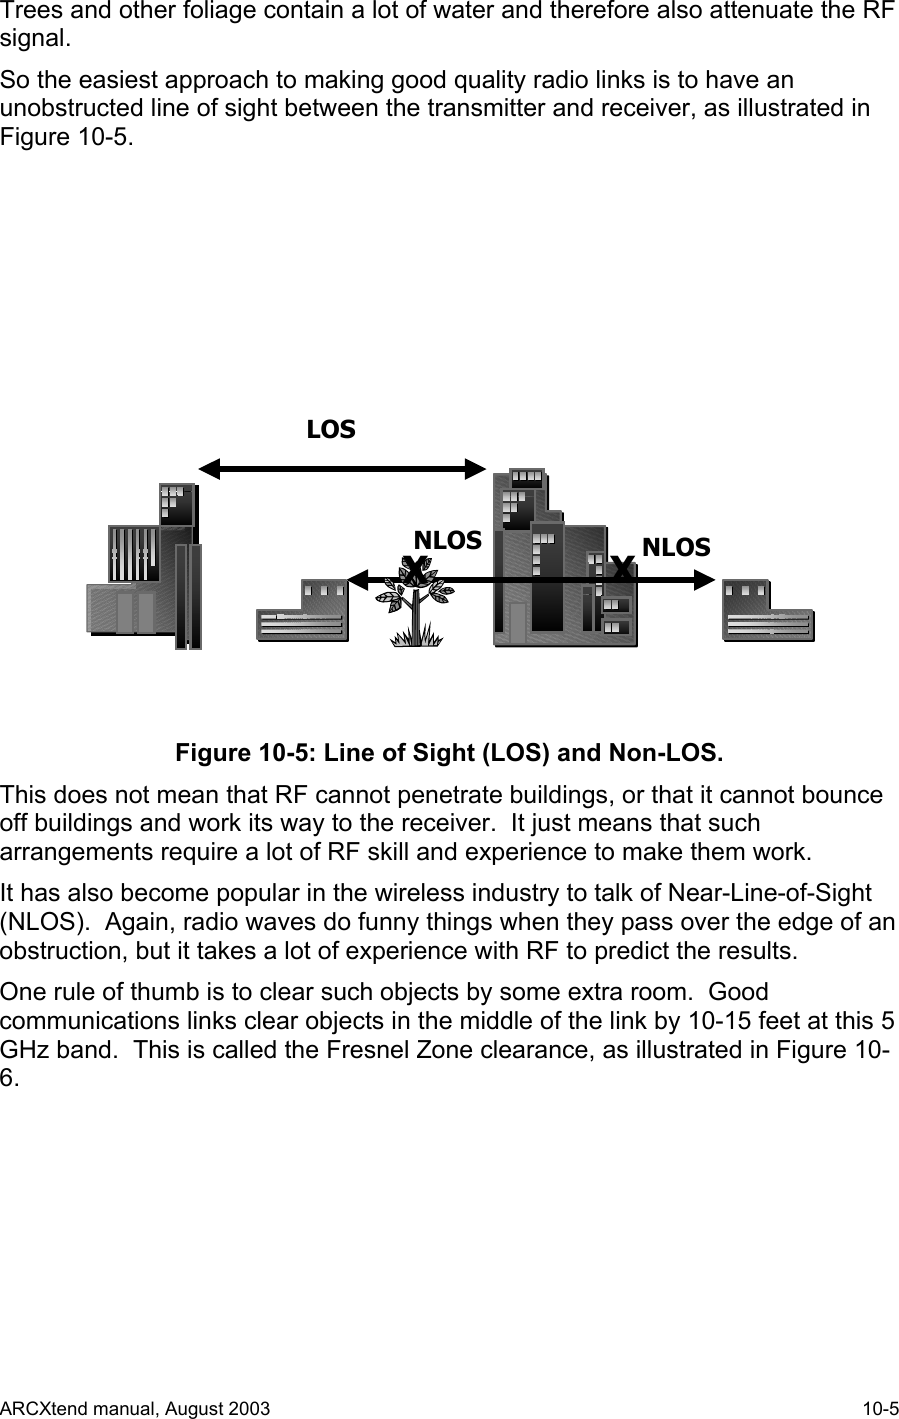  Trees and other foliage contain a lot of water and therefore also attenuate the RF signal. So the easiest approach to making good quality radio links is to have an unobstructed line of sight between the transmitter and receiver, as illustrated in Figure 10-5. LOSNLOSXNLOSX Figure 10-5: Line of Sight (LOS) and Non-LOS. This does not mean that RF cannot penetrate buildings, or that it cannot bounce off buildings and work its way to the receiver.  It just means that such arrangements require a lot of RF skill and experience to make them work. It has also become popular in the wireless industry to talk of Near-Line-of-Sight (NLOS).  Again, radio waves do funny things when they pass over the edge of an obstruction, but it takes a lot of experience with RF to predict the results. One rule of thumb is to clear such objects by some extra room.  Good communications links clear objects in the middle of the link by 10-15 feet at this 5 GHz band.  This is called the Fresnel Zone clearance, as illustrated in Figure 10-6. ARCXtend manual, August 2003    10-5 